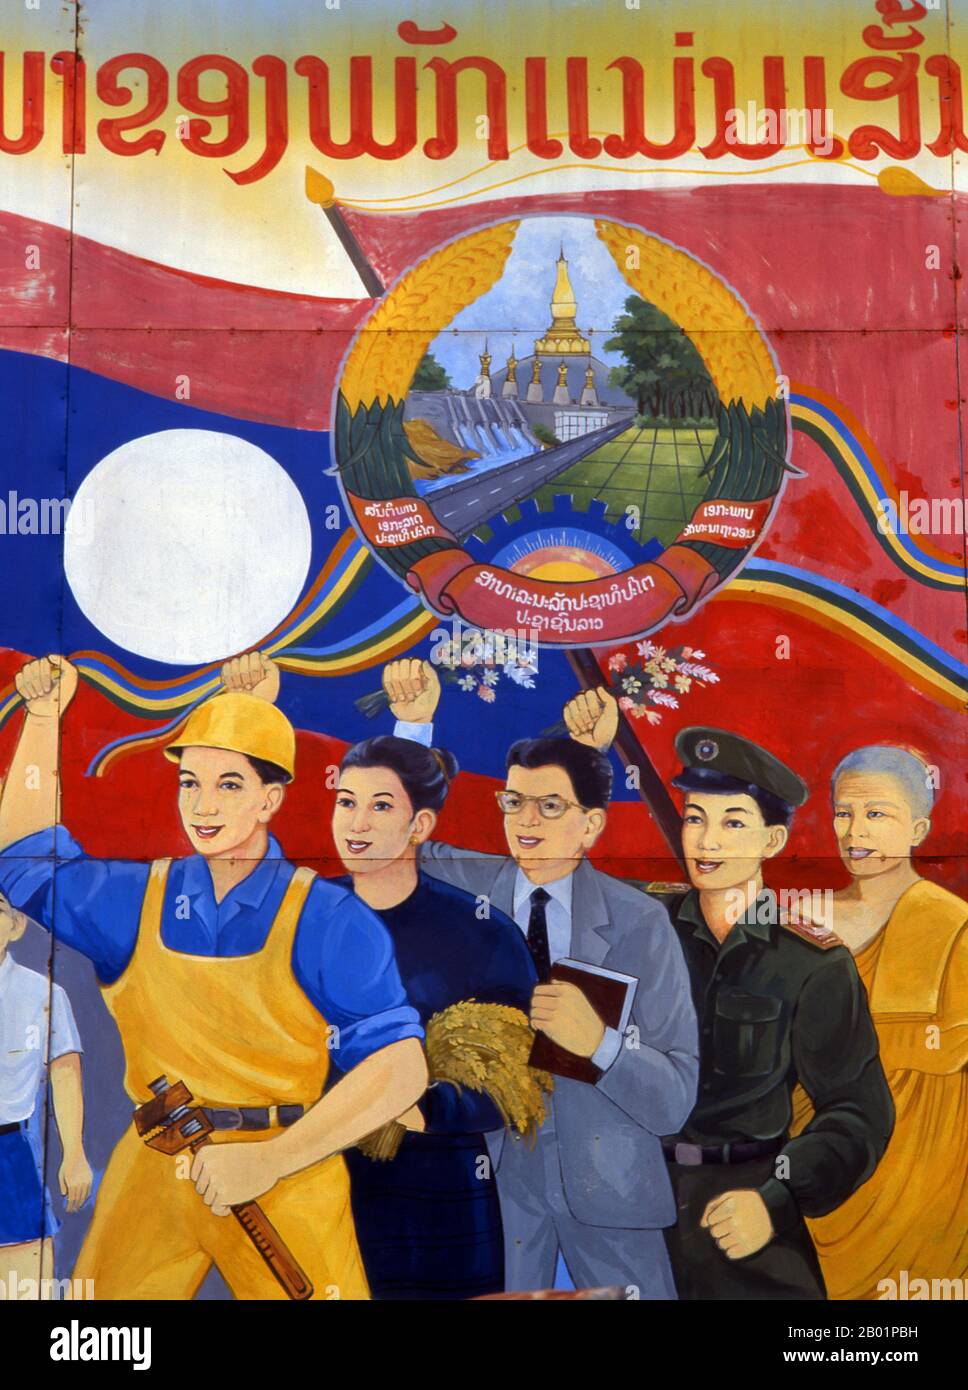 Laos: Revolutionary Socialist realist-style political poster on the streets of Vientiane.  Socialist realism is a style of realistic art which was developed in the Soviet Union and became a dominant style in other communist countries. Socialist realism is a teleologically-oriented style having its purpose the furtherance of the goals of socialism and communism. Although related, it should not be confused with social realism, a type of art that realistically depicts subjects of social concern. Unlike social realism, socialist realism often glorifies the roles of the poor. Stock Photo